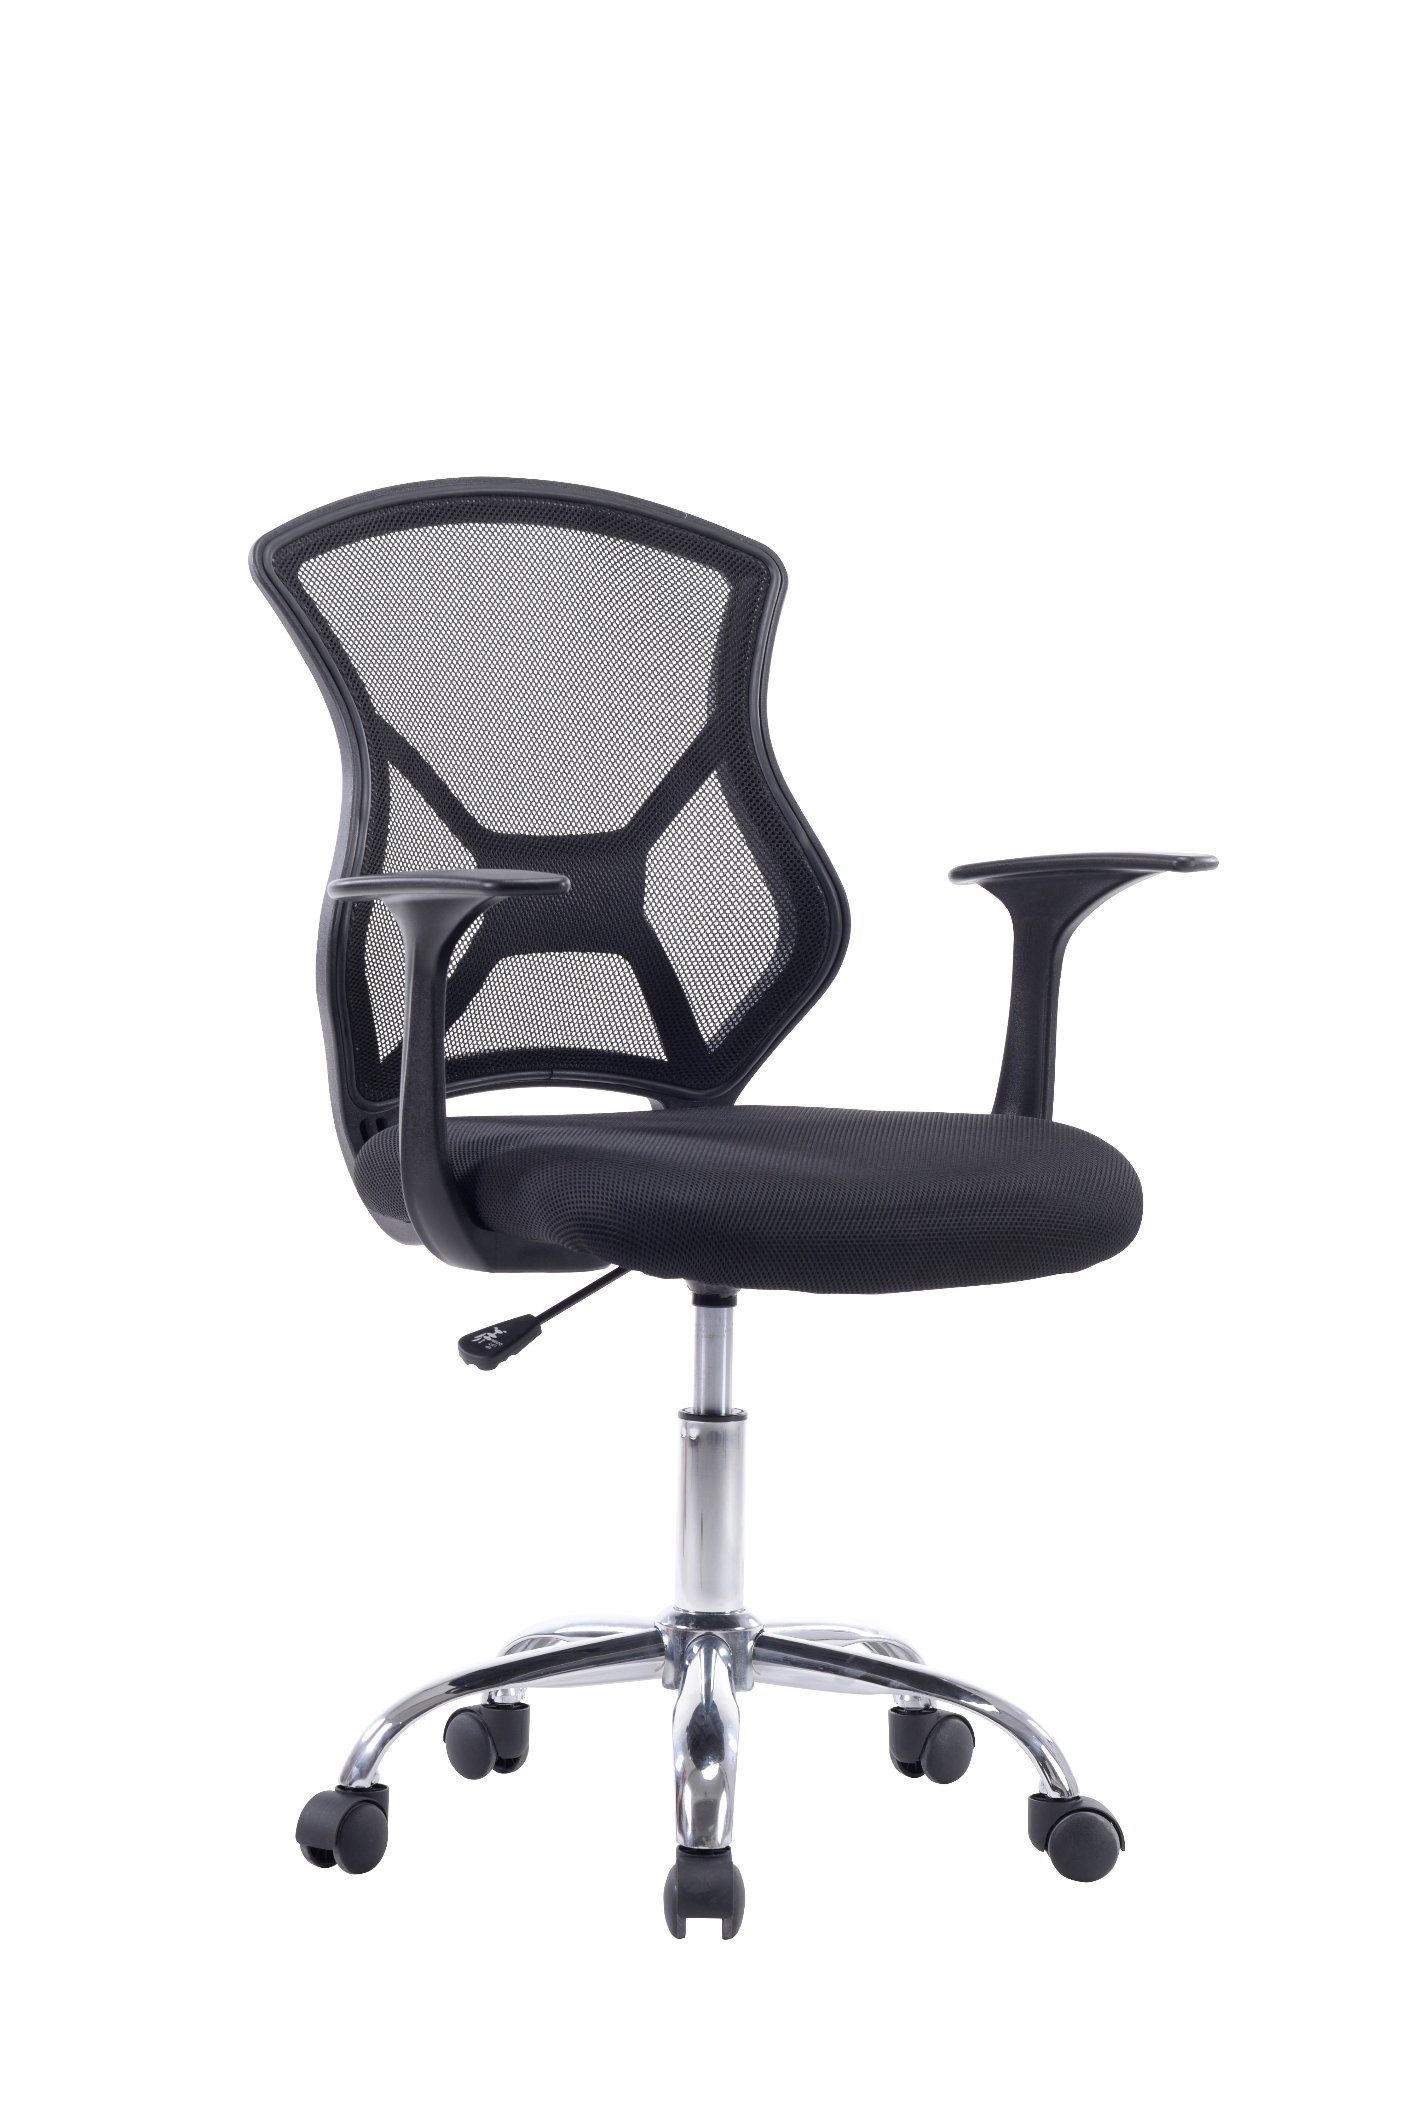 Modern China Wholesale Design Chair Furniture Mesh Office